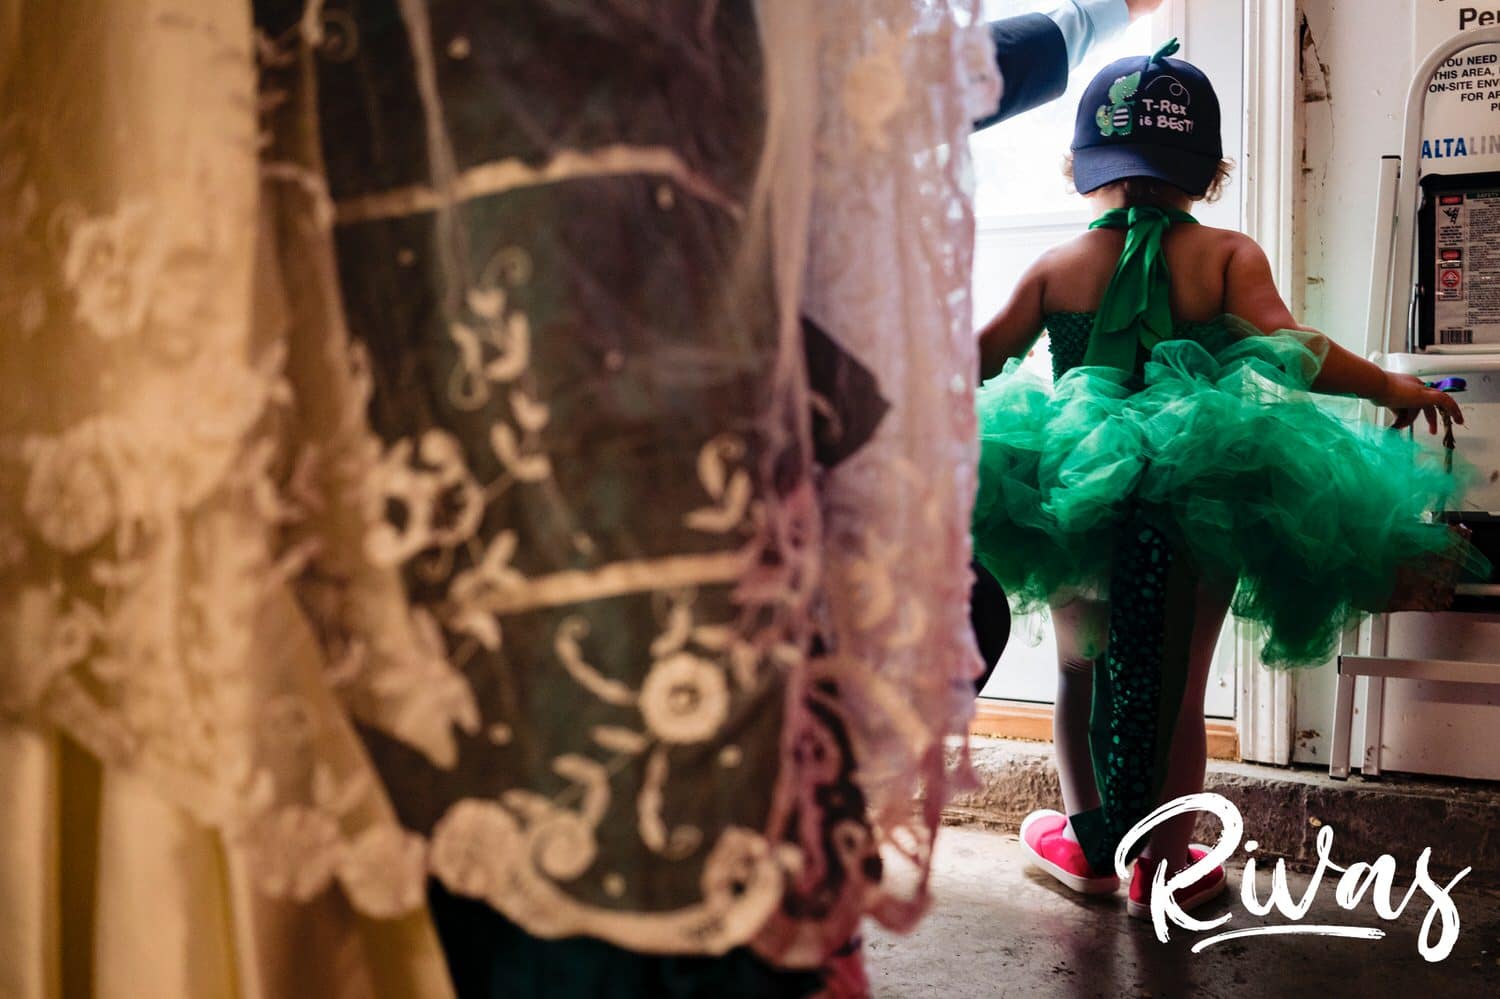 A candid picture taken from behind a bride wearing a jade gown and Belgian lace veil of a flower girl, wearing a bright green, sequined tutu with a sequined dinosaur tail and a "t-rex is best" backwards hat on, of the flower girl getting ready to walk down the wedding aisle. 